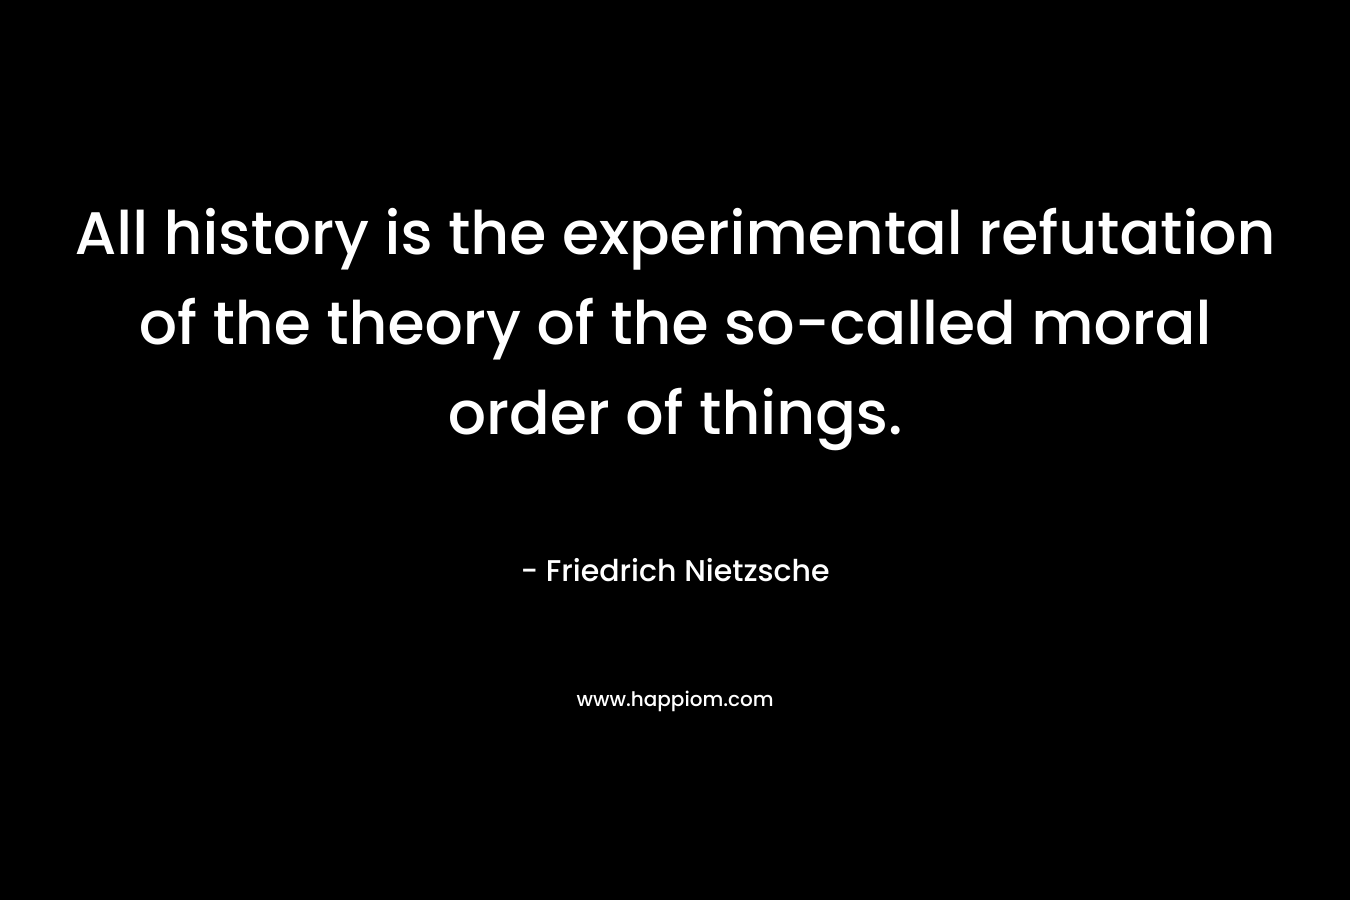 All history is the experimental refutation of the theory of the so-called moral order of things.